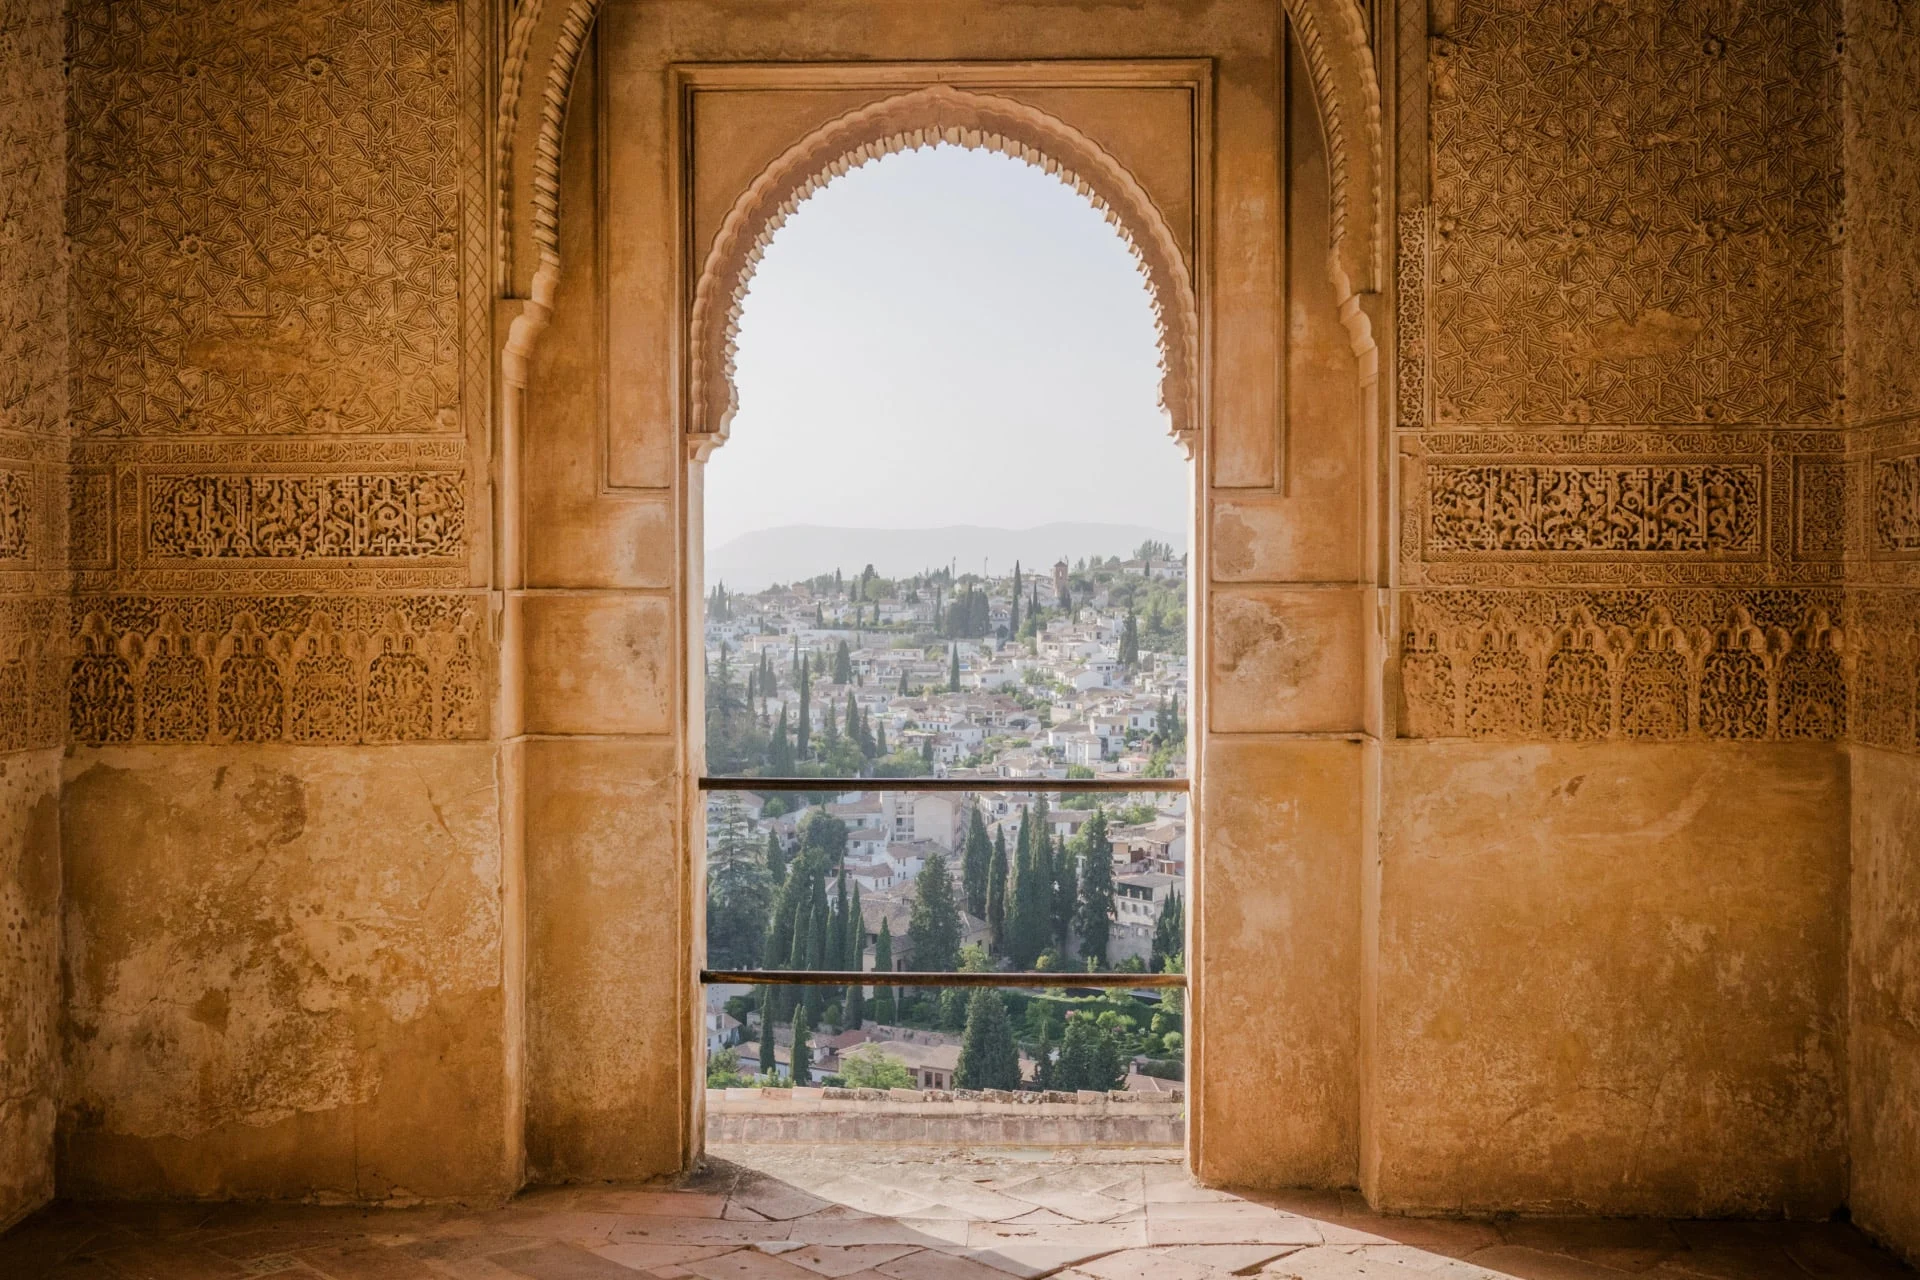 A view from an arched window in a building in granada, spain.